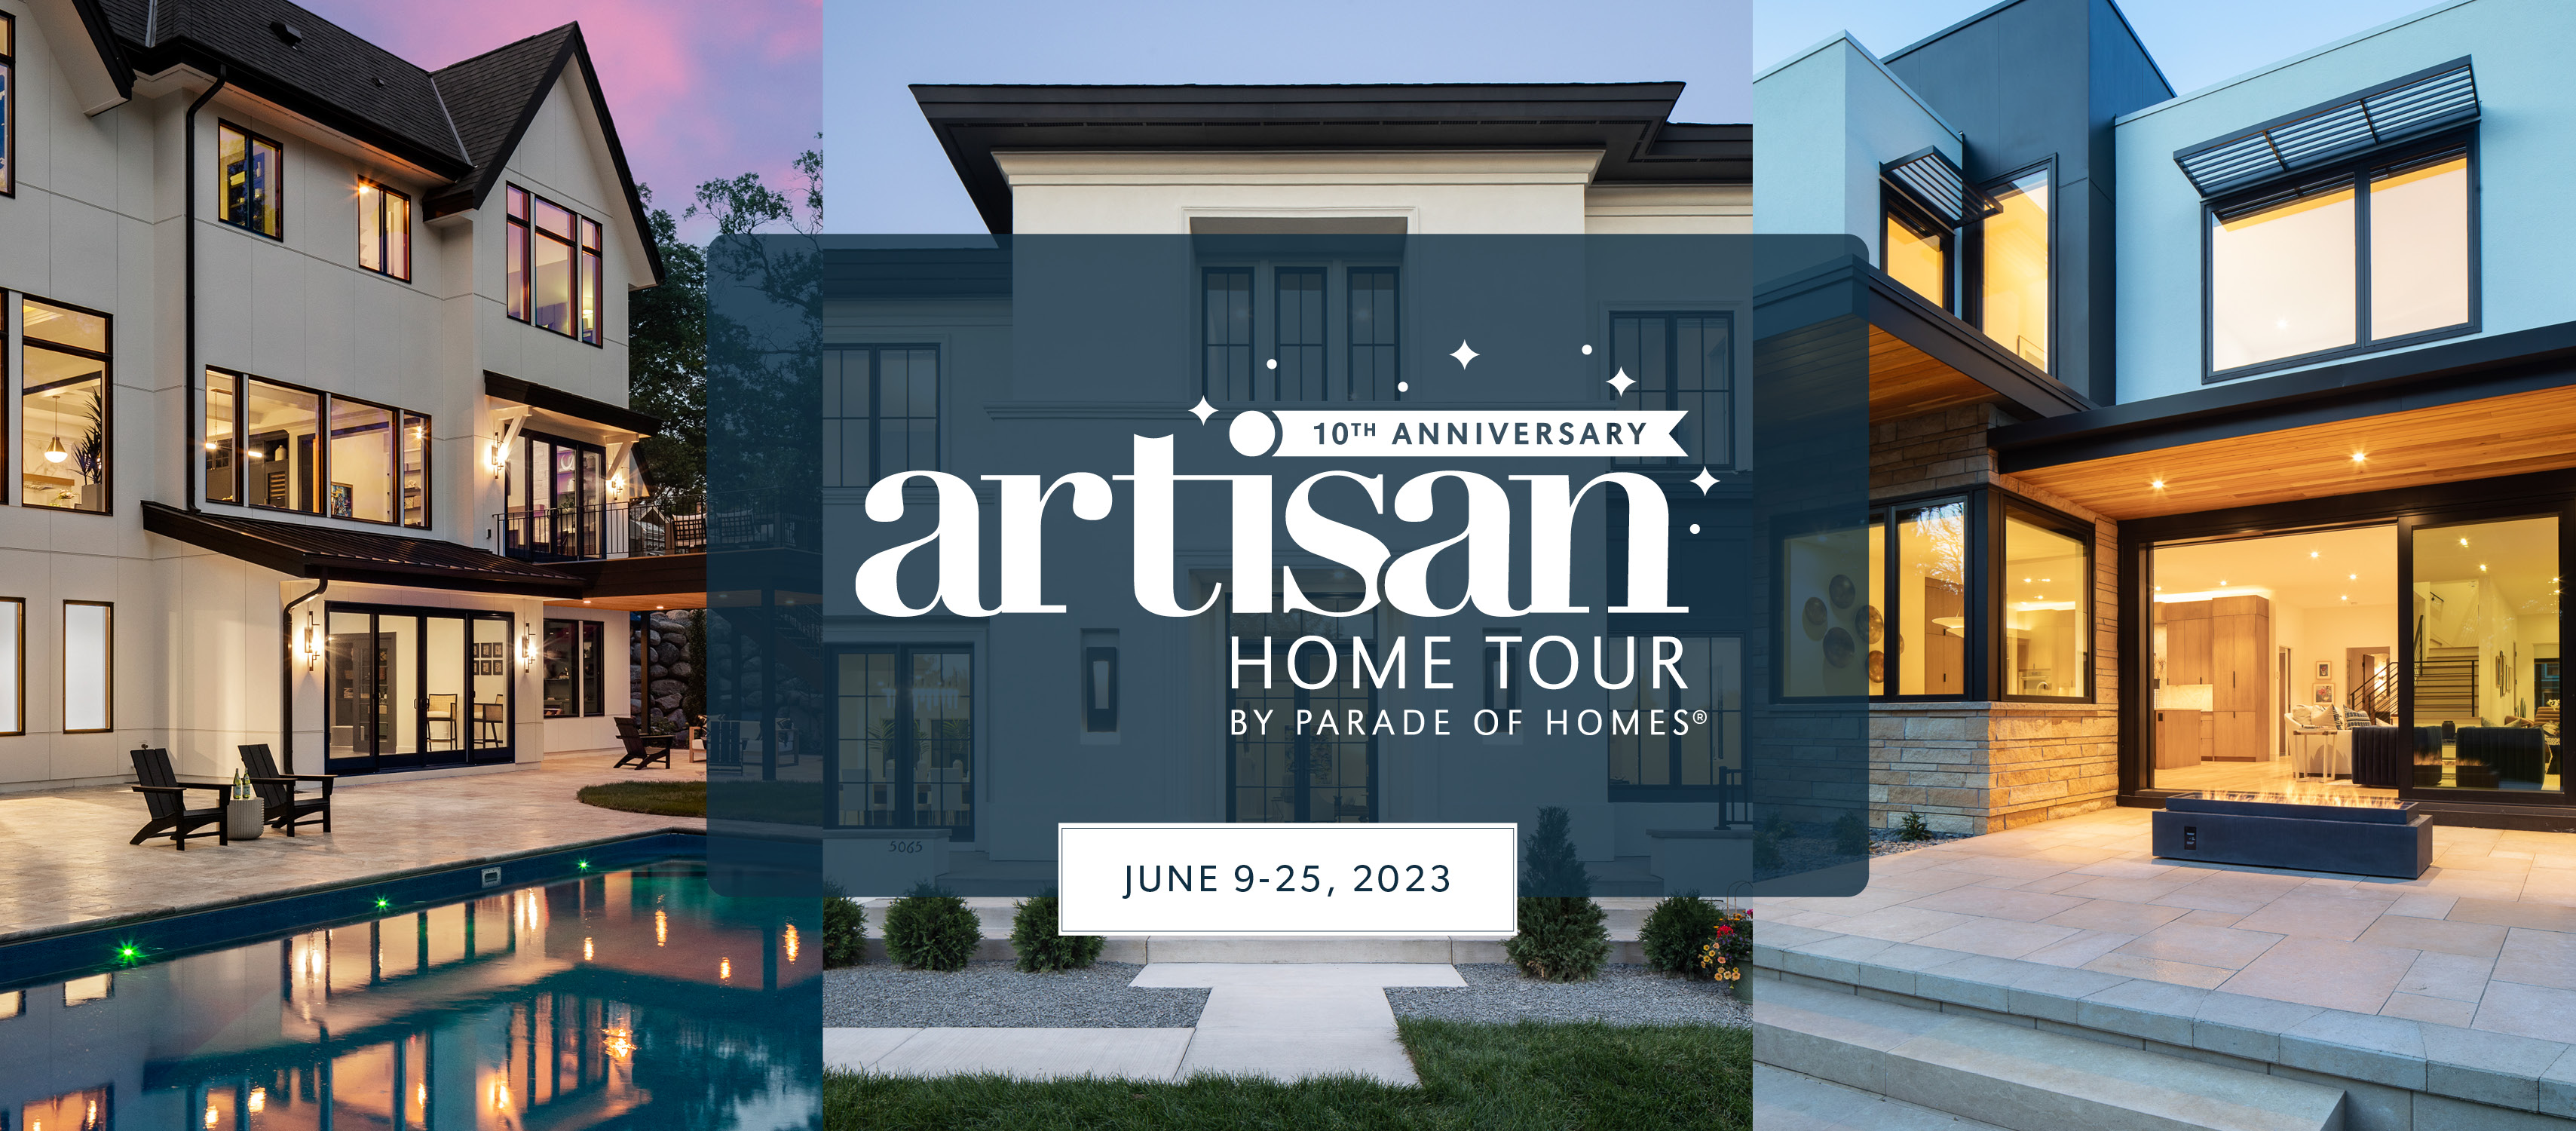 Image for 2023 Summer Artisan Home Tour by Parade of Homes FAQs